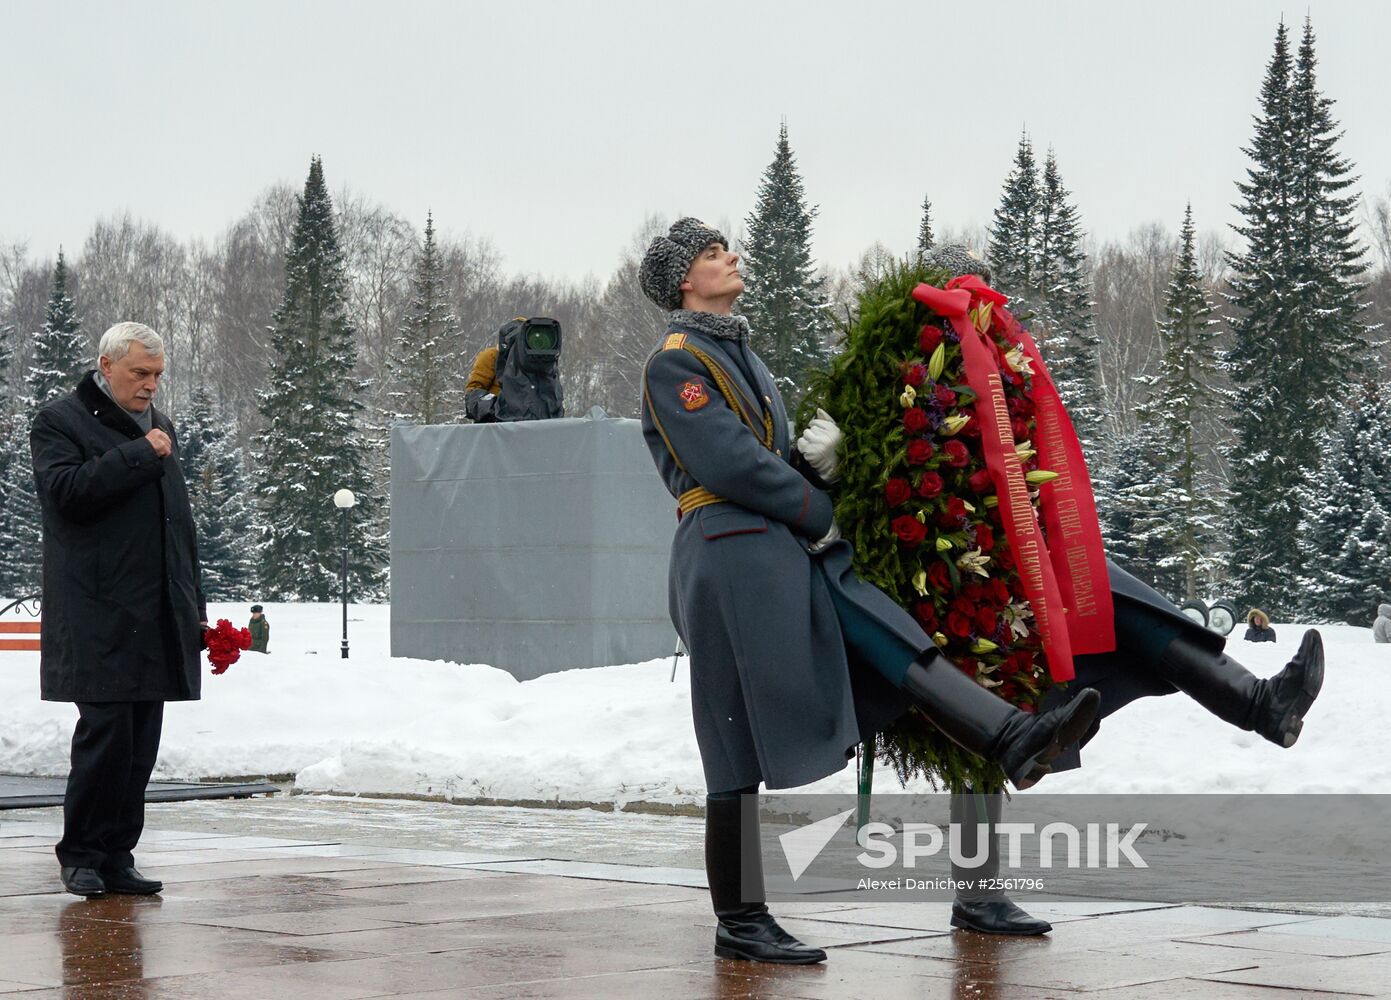 The 71st anniversary of lifting the siege of Leningrad